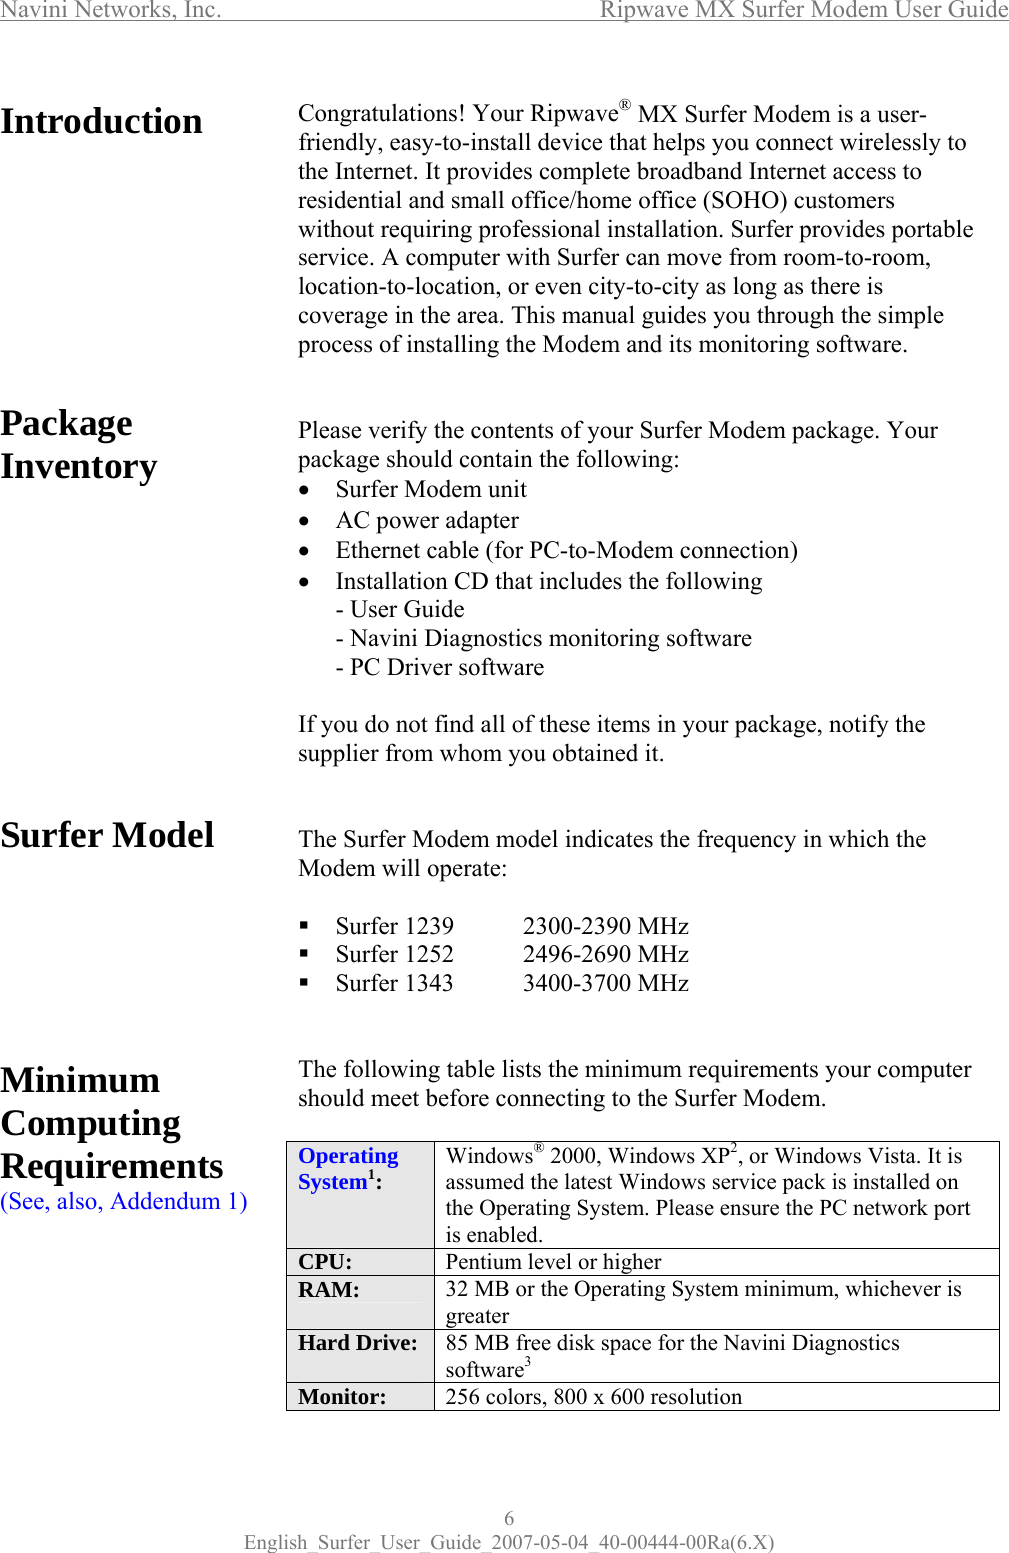 Navini Networks, Inc.      Ripwave MX Surfer Modem User Guide 6 English_Surfer_User_Guide_2007-05-04_40-00444-00Ra(6.X) Introduction          Package Inventory             Surfer Model        Minimum Computing Requirements (See, also, Addendum 1)         Congratulations! Your Ripwave® MX Surfer Modem is a user-friendly, easy-to-install device that helps you connect wirelessly to the Internet. It provides complete broadband Internet access to residential and small office/home office (SOHO) customers without requiring professional installation. Surfer provides portable  service. A computer with Surfer can move from room-to-room, location-to-location, or even city-to-city as long as there is coverage in the area. This manual guides you through the simple process of installing the Modem and its monitoring software.   Please verify the contents of your Surfer Modem package. Your package should contain the following:  • Surfer Modem unit • AC power adapter • Ethernet cable (for PC-to-Modem connection) • Installation CD that includes the following - User Guide - Navini Diagnostics monitoring software - PC Driver software  If you do not find all of these items in your package, notify the supplier from whom you obtained it.   The Surfer Modem model indicates the frequency in which the Modem will operate:   Surfer 1239  2300-2390 MHz  Surfer 1252  2496-2690 MHz  Surfer 1343  3400-3700 MHz    The following table lists the minimum requirements your computer should meet before connecting to the Surfer Modem.   Operating System1:  Windows® 2000, Windows XP2, or Windows Vista. It is assumed the latest Windows service pack is installed on the Operating System. Please ensure the PC network port is enabled. CPU:  Pentium level or higher RAM:  32 MB or the Operating System minimum, whichever is greater Hard Drive:  85 MB free disk space for the Navini Diagnostics software3 Monitor:  256 colors, 800 x 600 resolution   